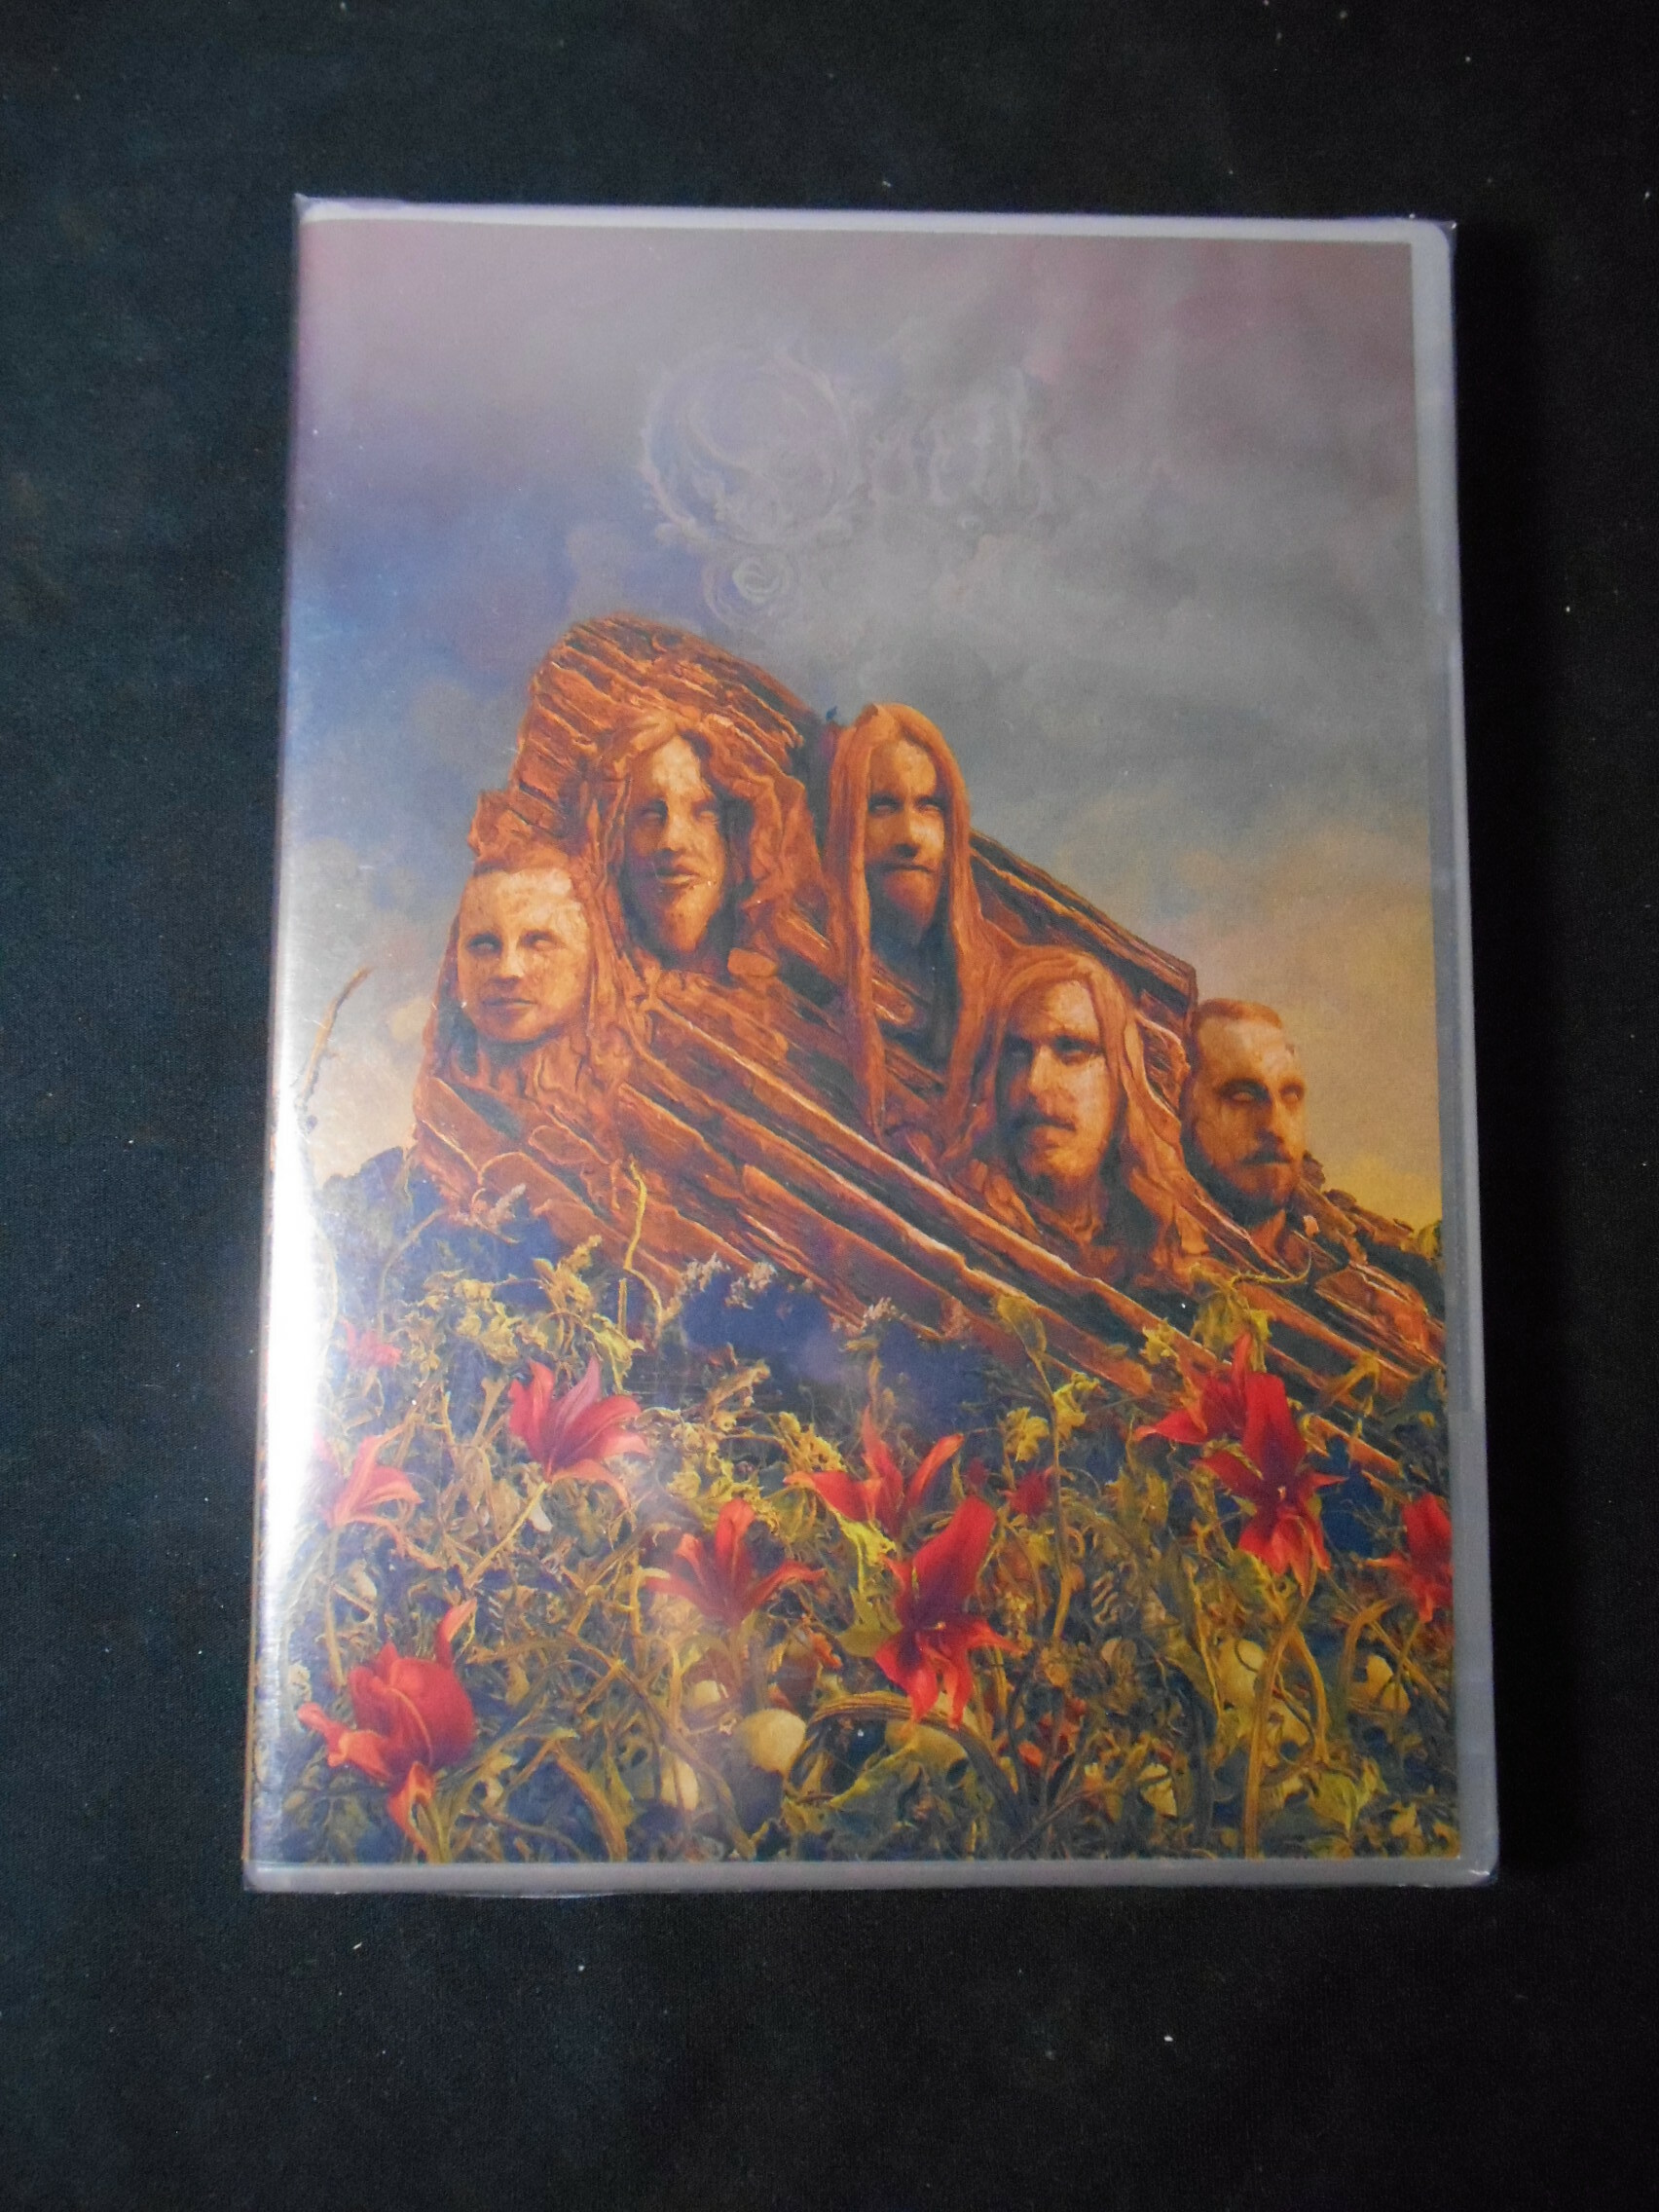 DVD - Opeth - Garden of the Titans Live at the Red Rocks Amphitheatre (DVD+2CDs)